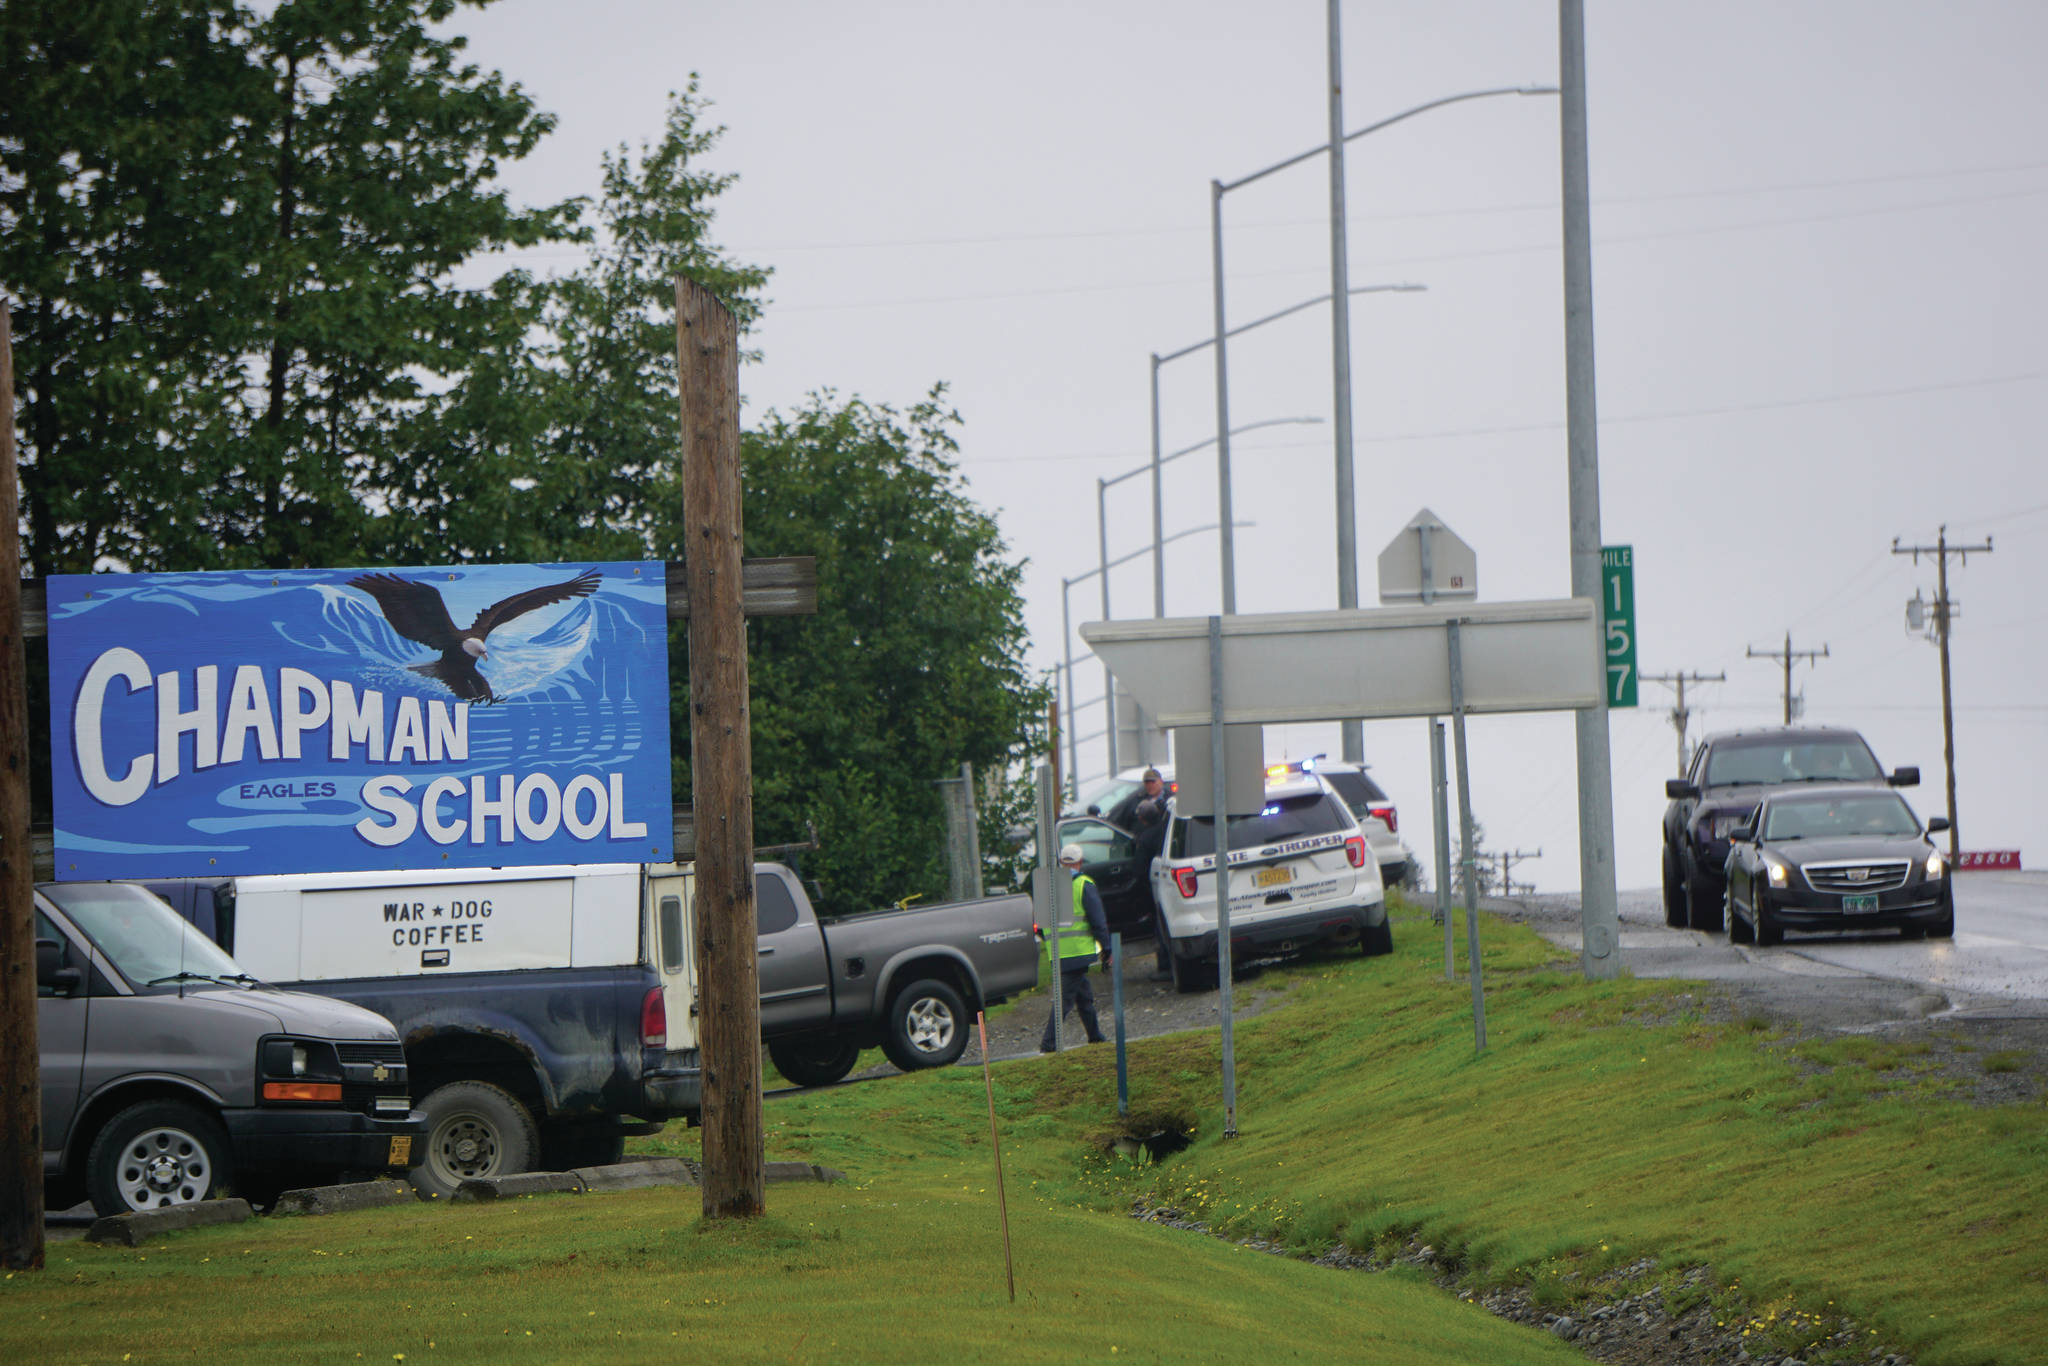 Parents on Monday, Aug. 23, 2021, pick up students at Chapman School in Anchor Point, Alaska, after a shooting about a half mile north on the Sterling Highway in which an Alaska State Trooper was shot. The school was on lockdown while troopers searched for the alleged shooter, Bret Herrick, 60. An Alaska State Trooper stands by. (Photo by Michael Armstrong/Homer News)